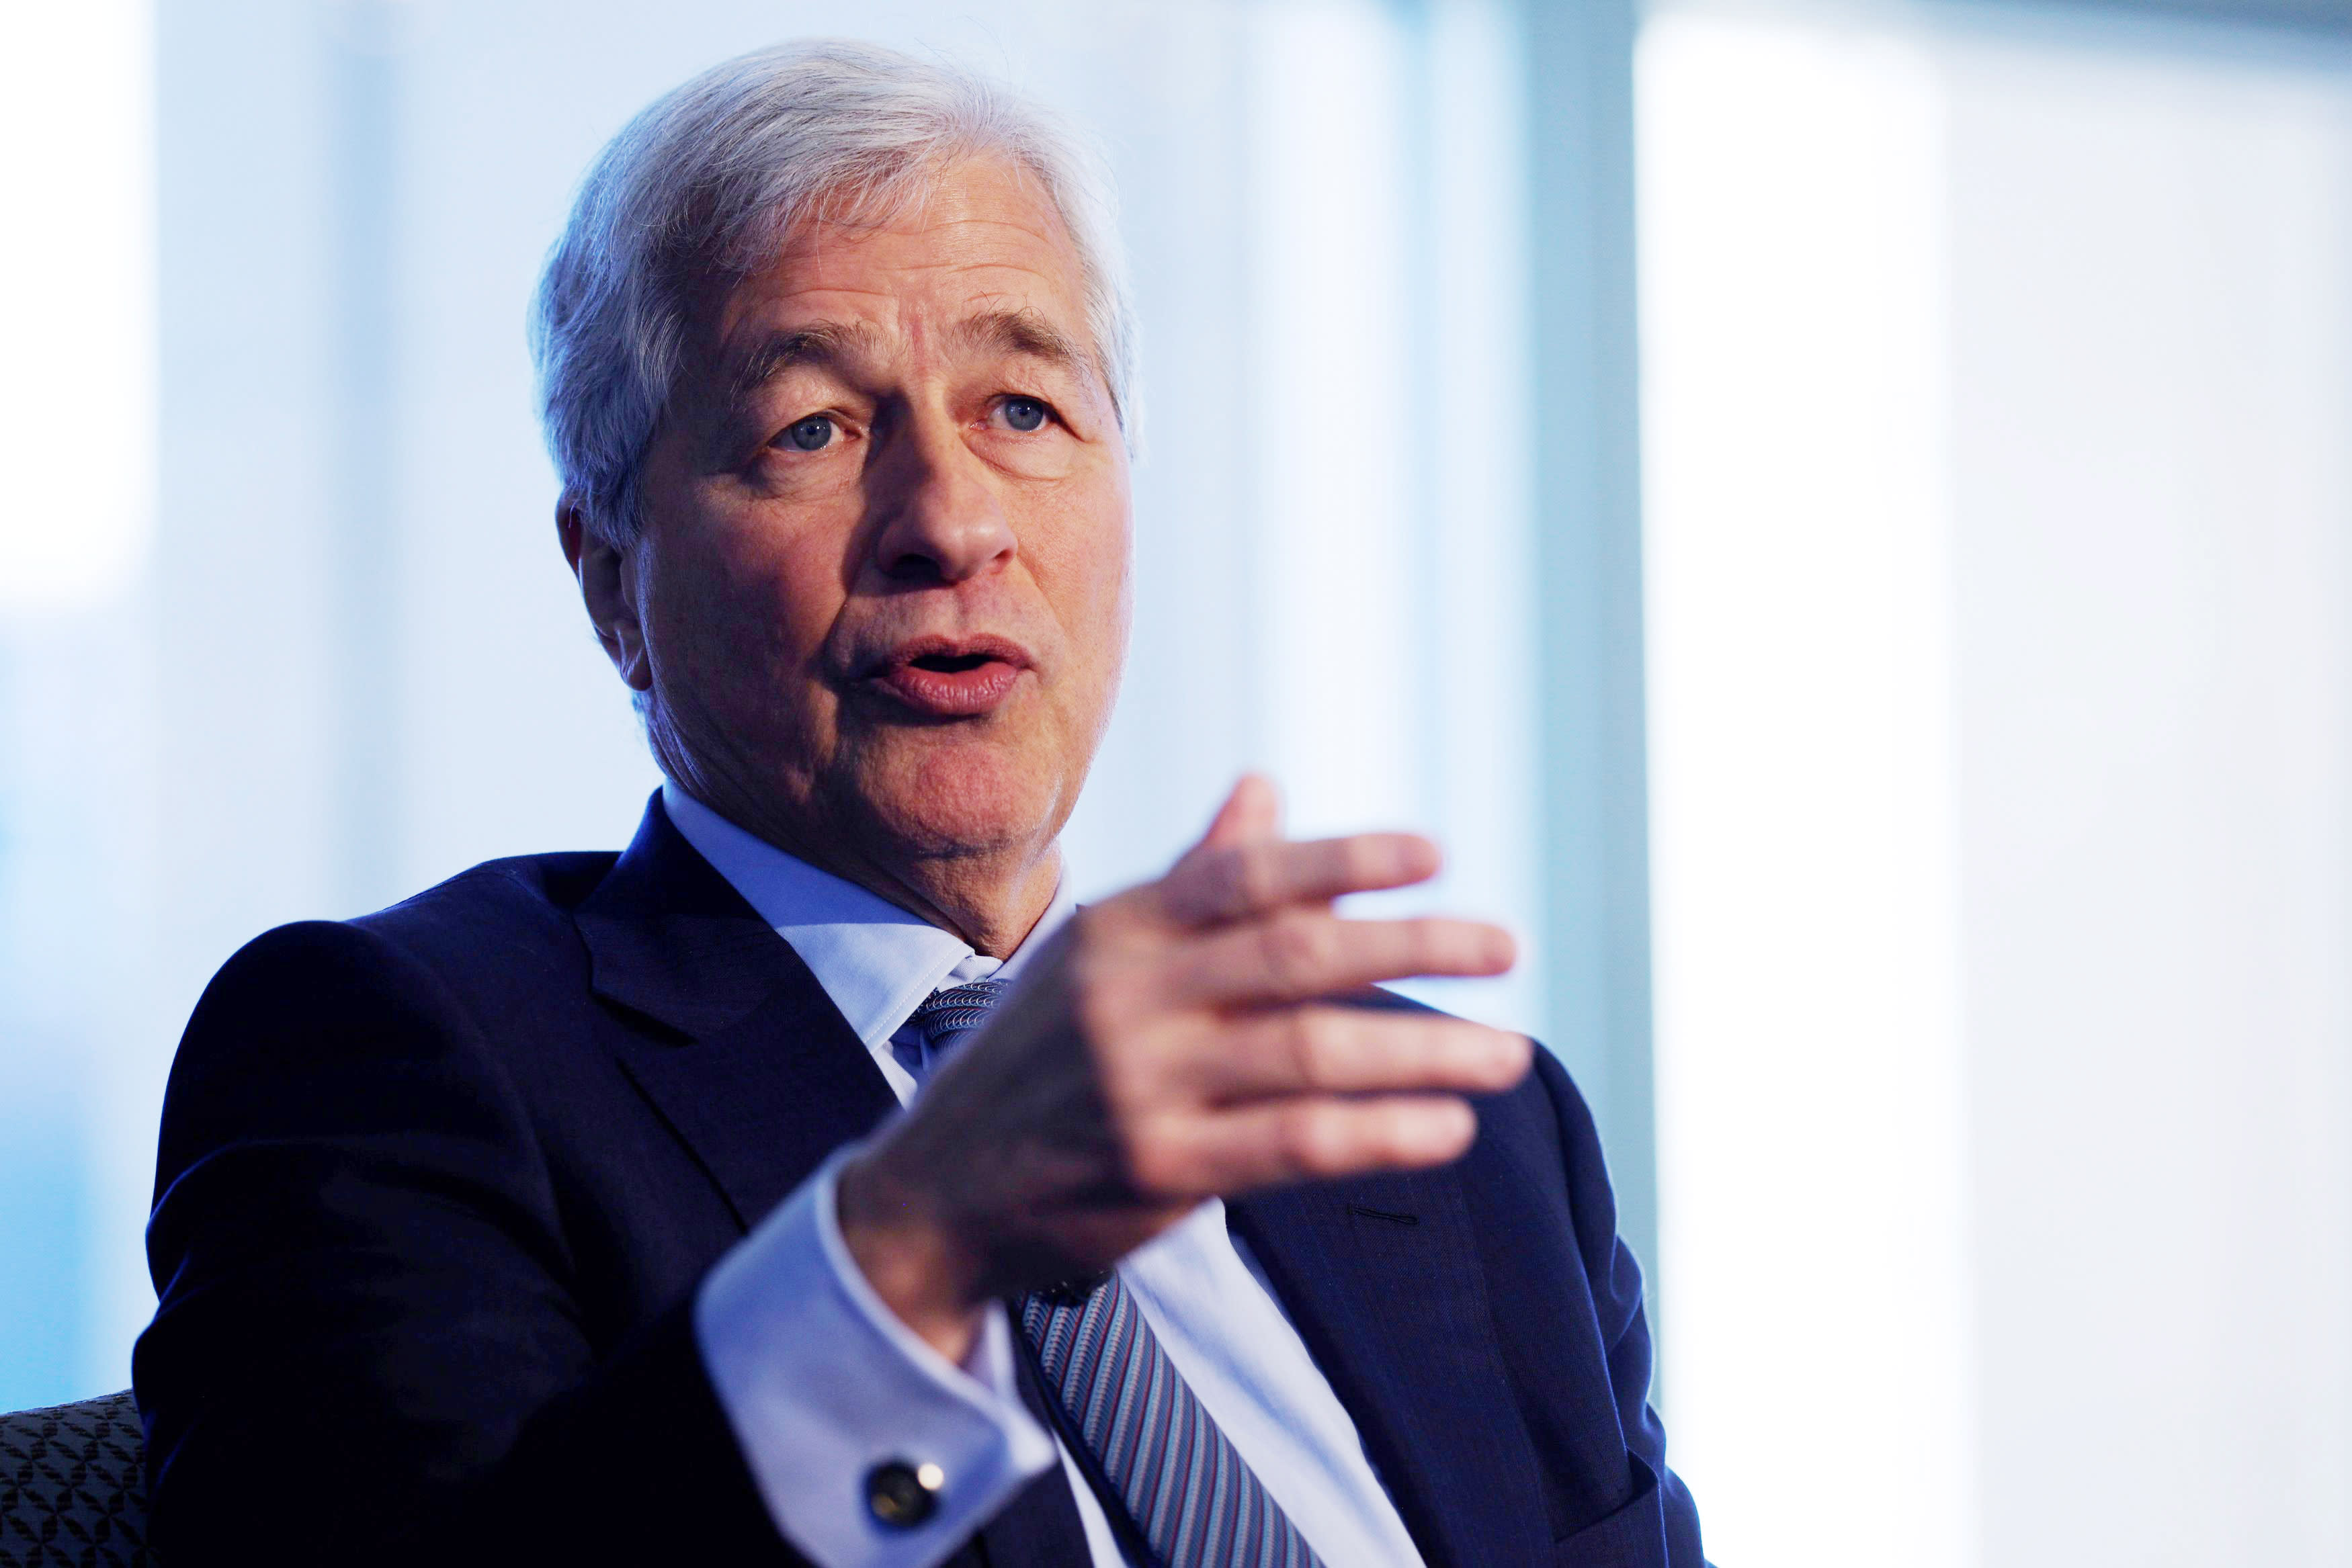 Jamie Dimon sees the best economic growth in decades, more than 4 Fed rate hikes this year